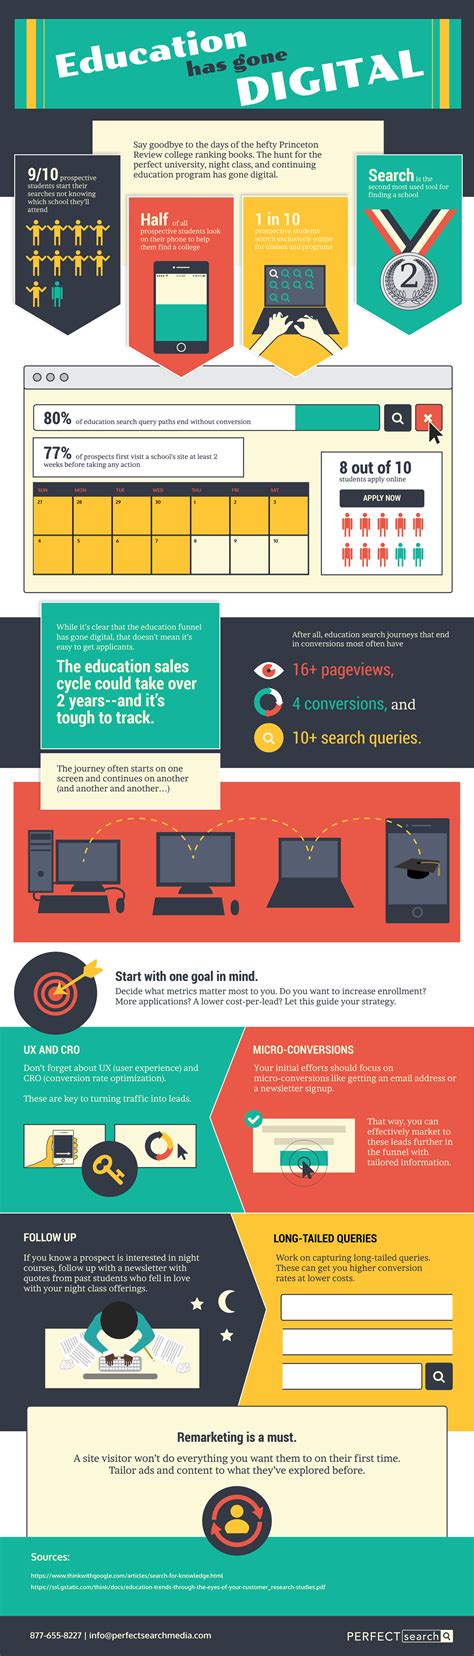 ace digital marketing  higher education infographic